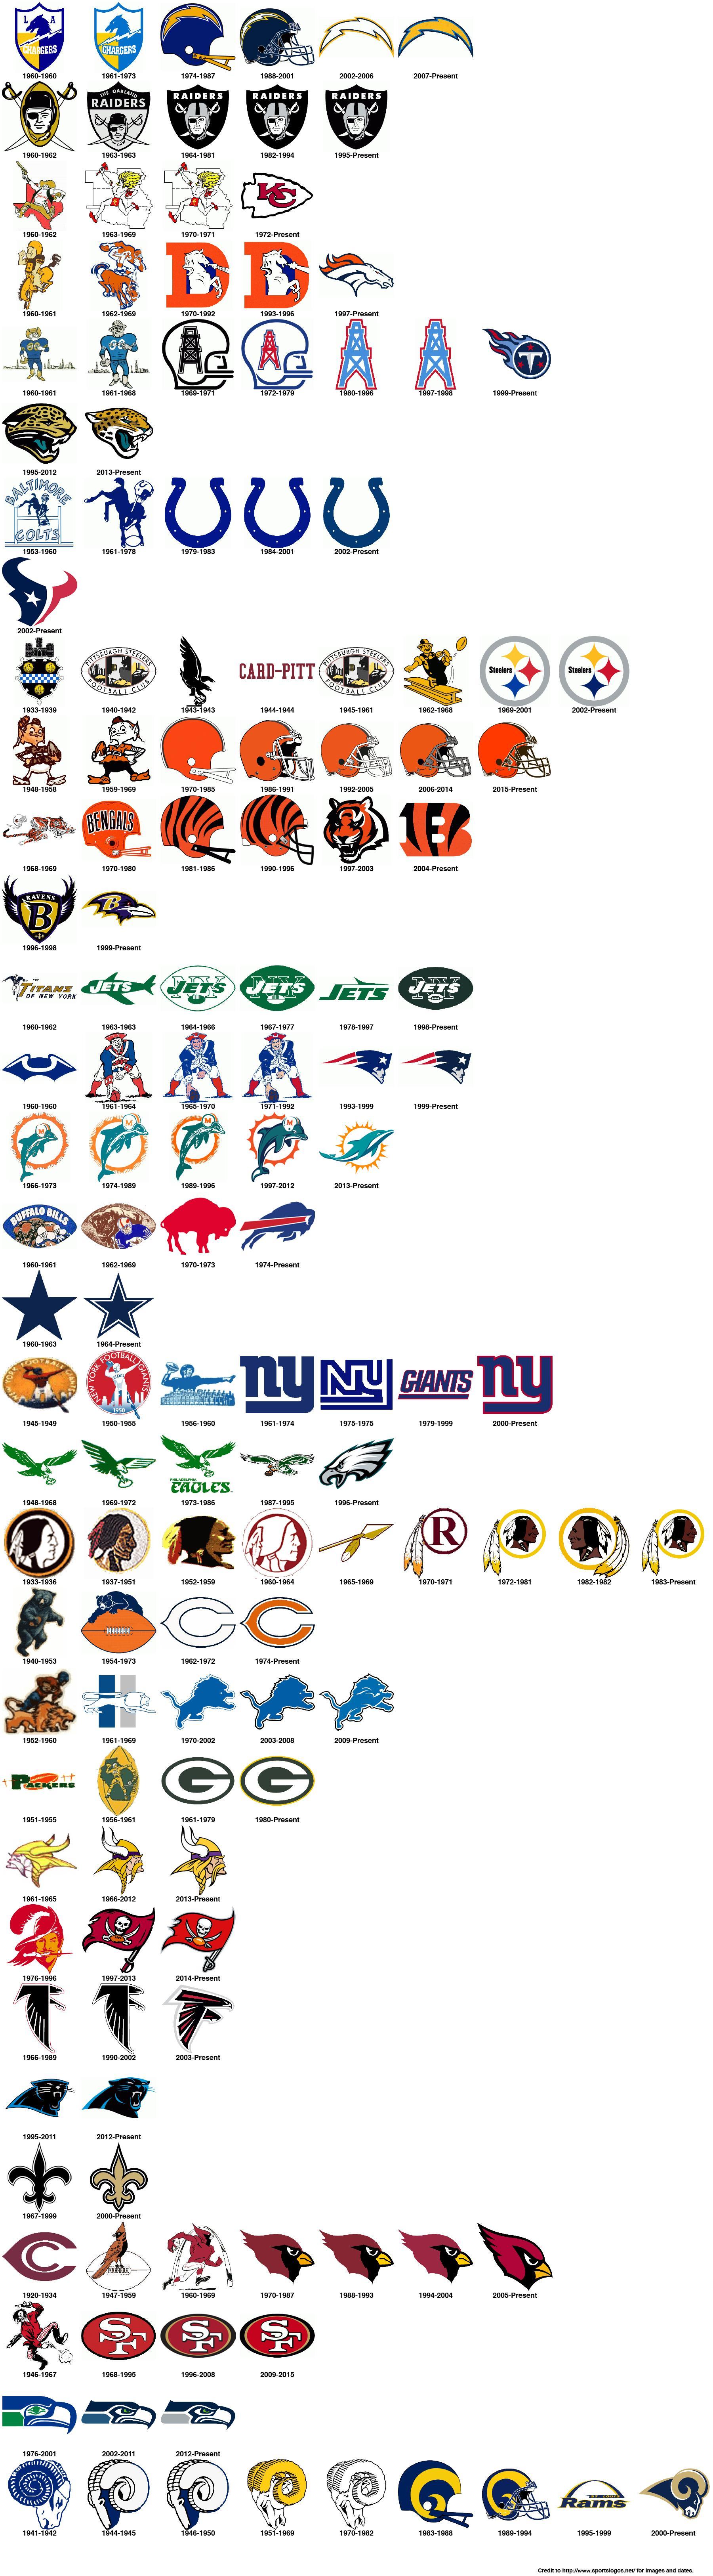 NFL Team Logo - NFL team logo changes throughout the their history. : nfl